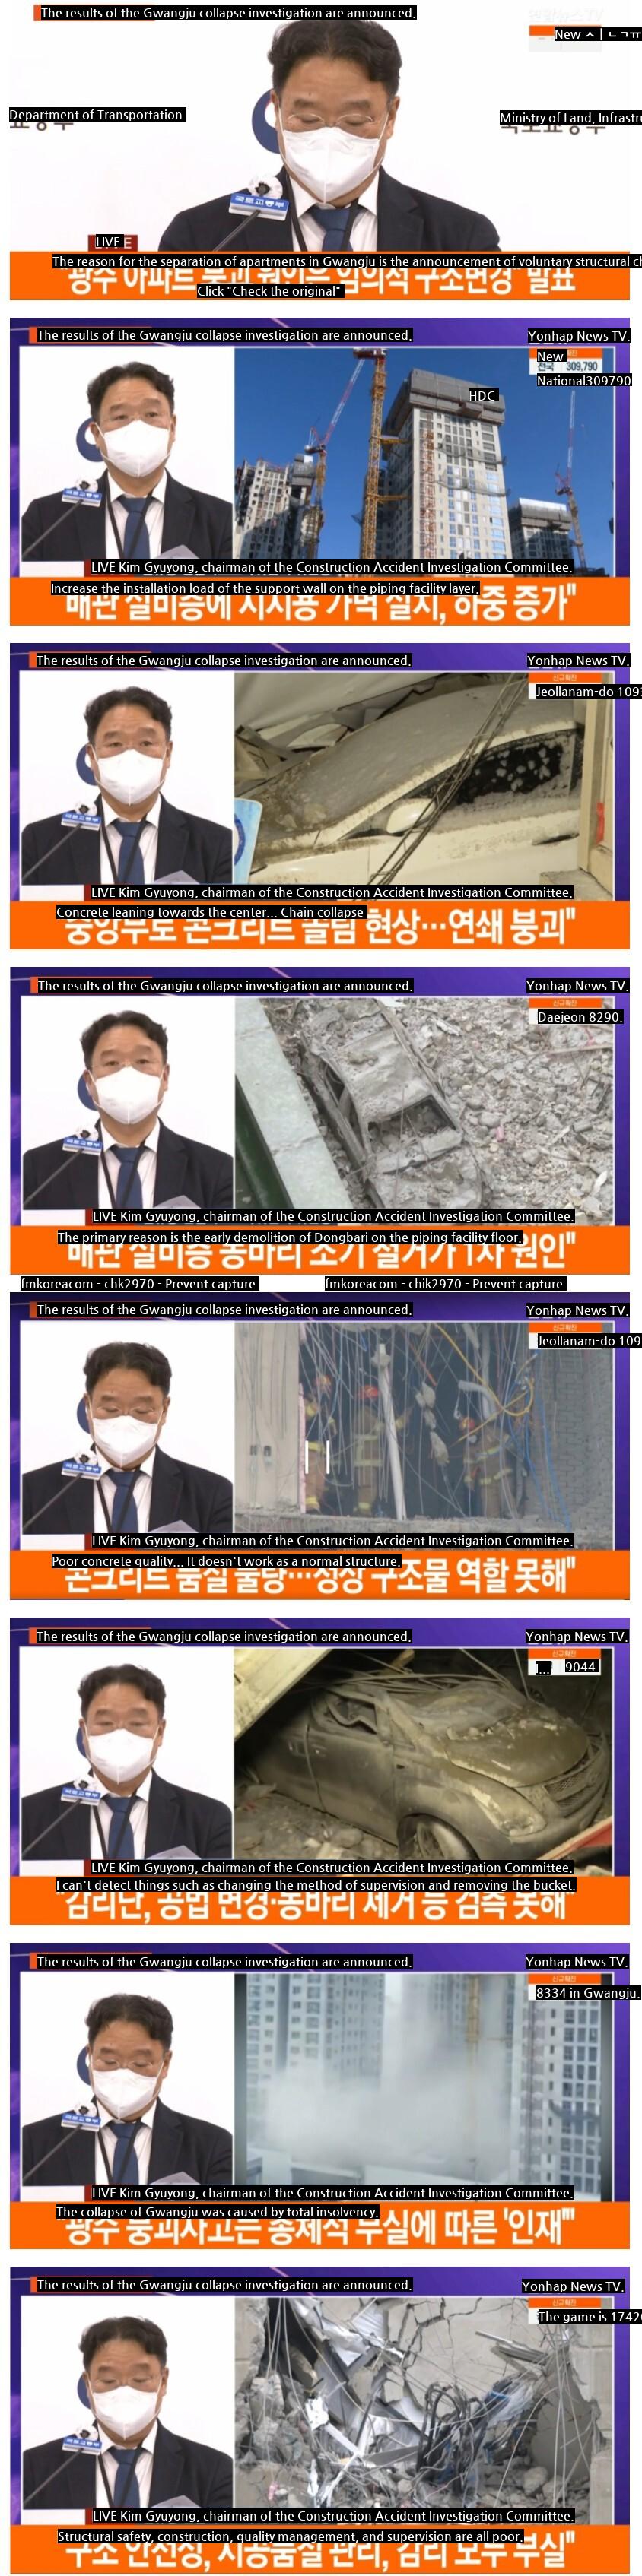 Official announcement of the cause of the collapse of apartments in Gwangju Hyundai Industrial.